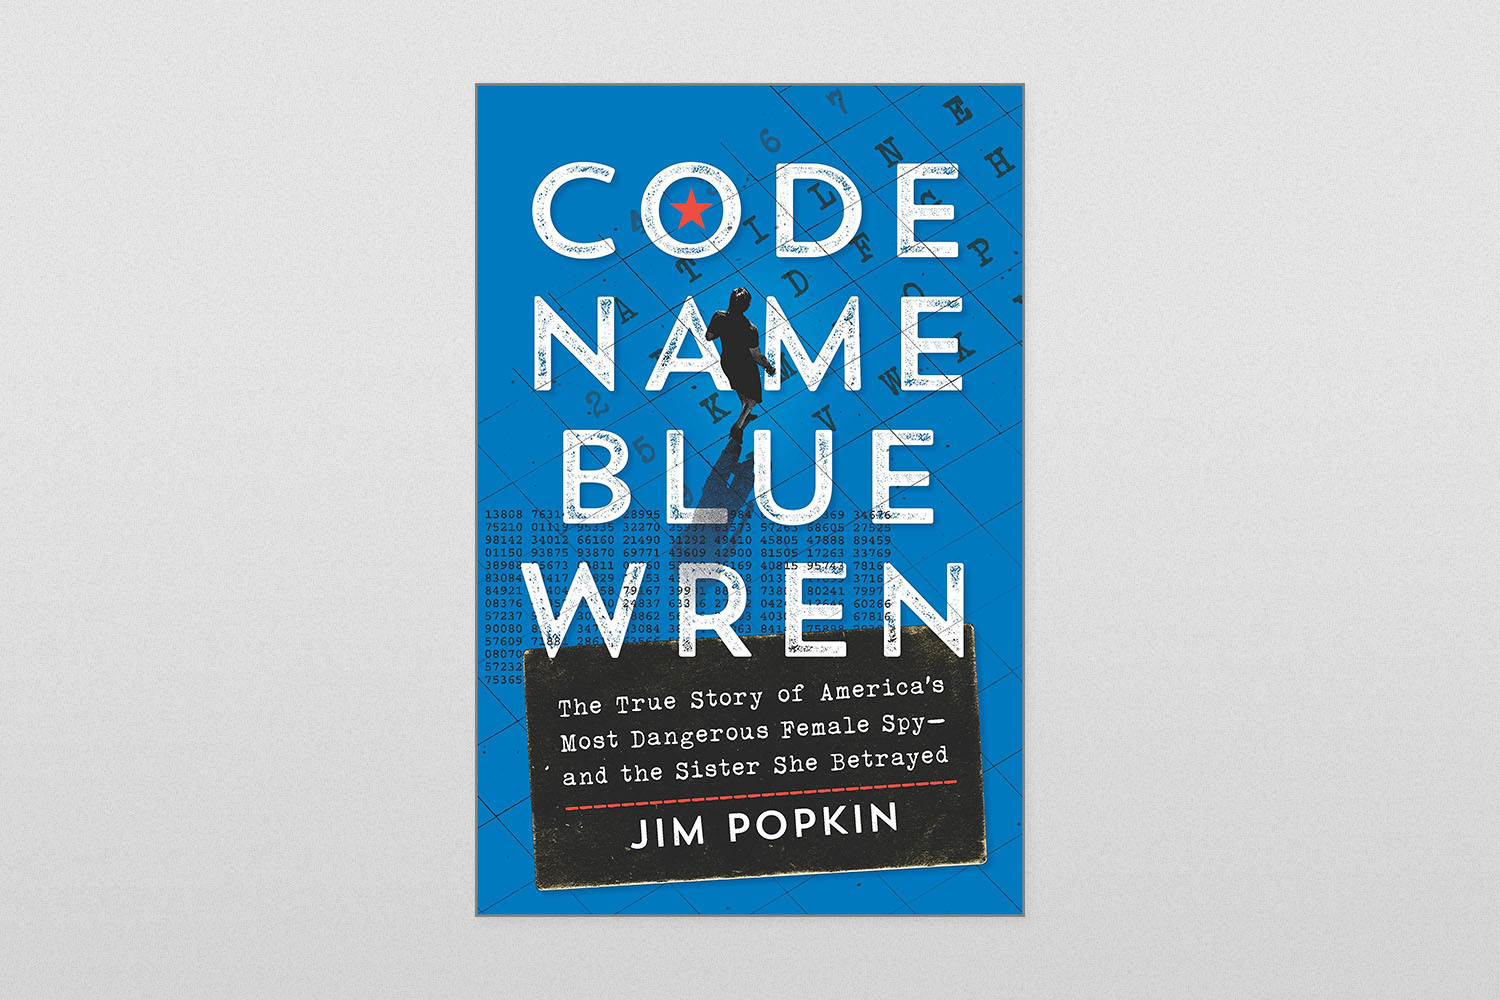 Code Name Blue Wren- The True Story of America's Most Dangerous Female Spy--And the Sister She Betrayed